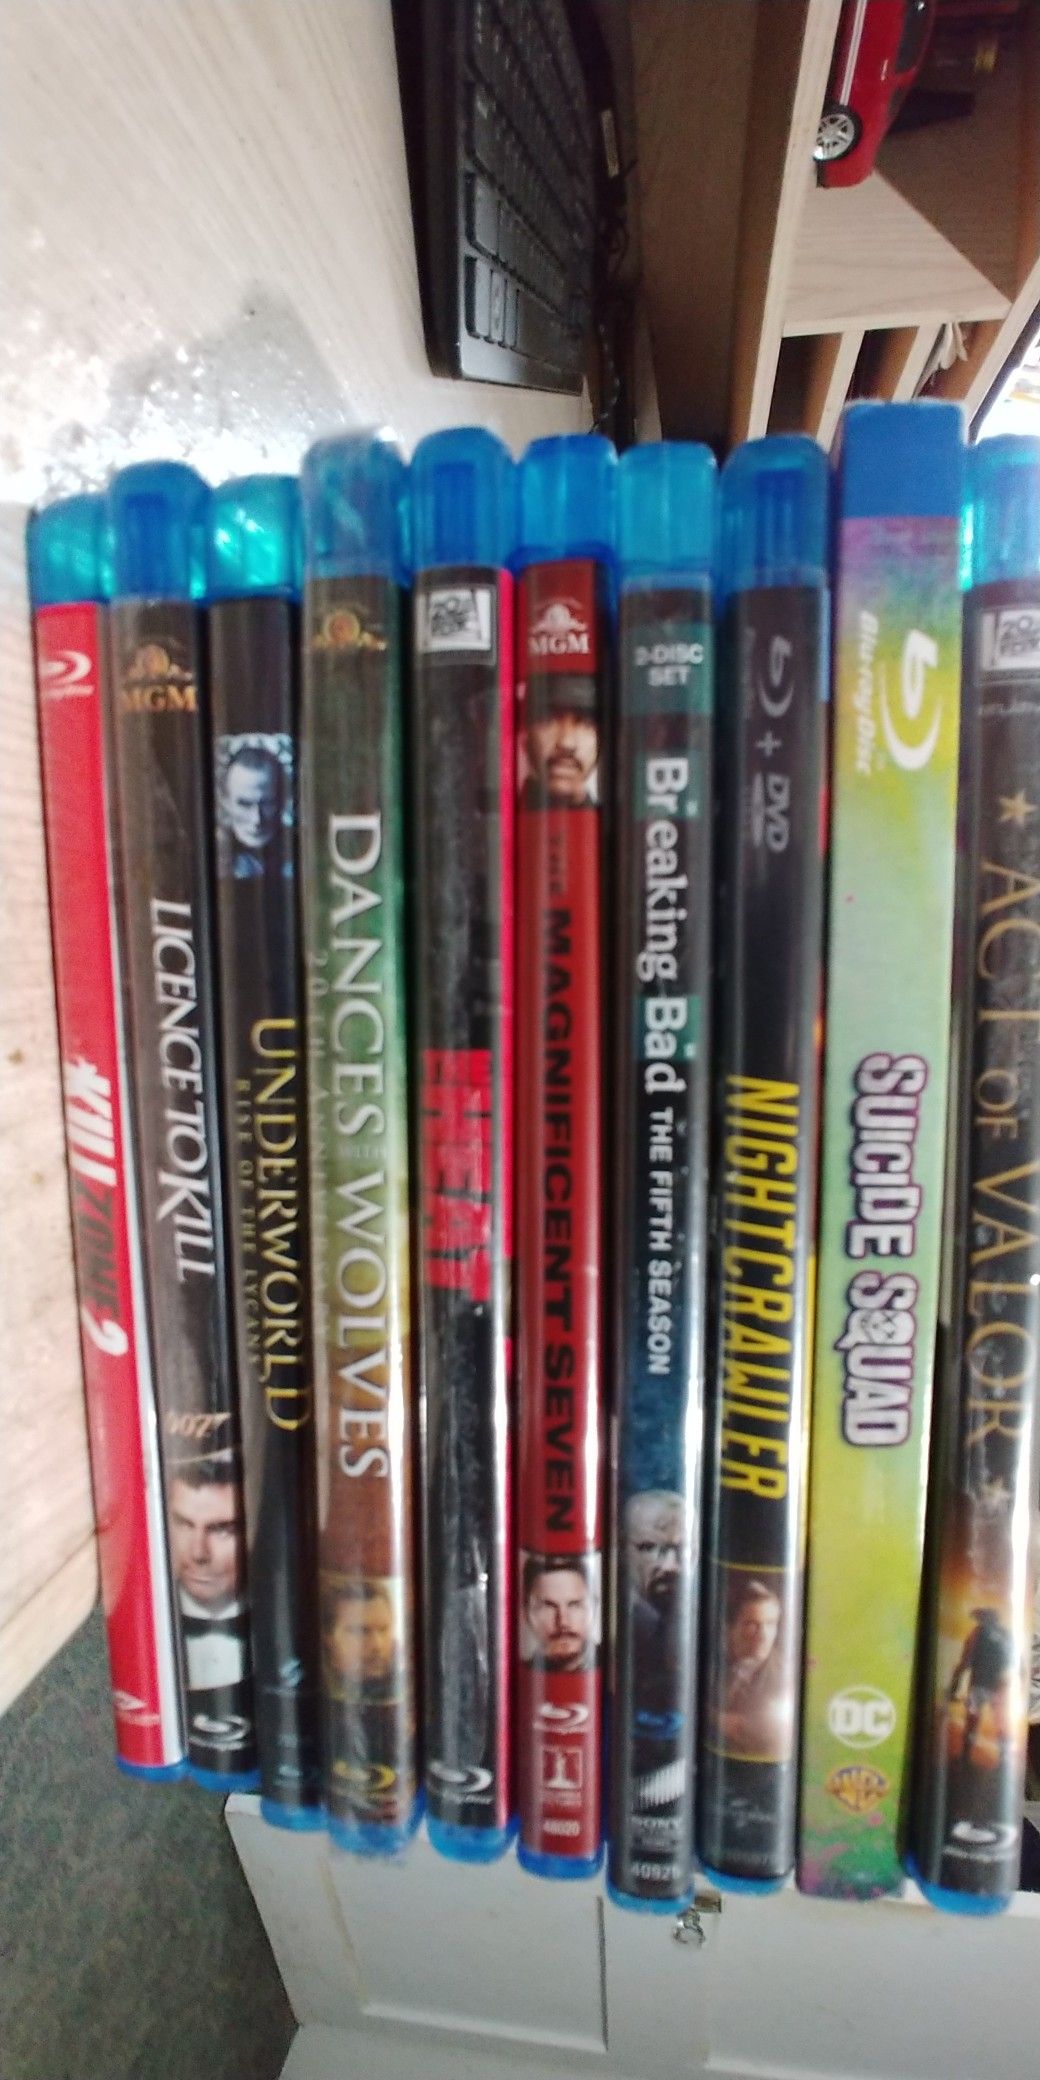 10 blu rays for $20